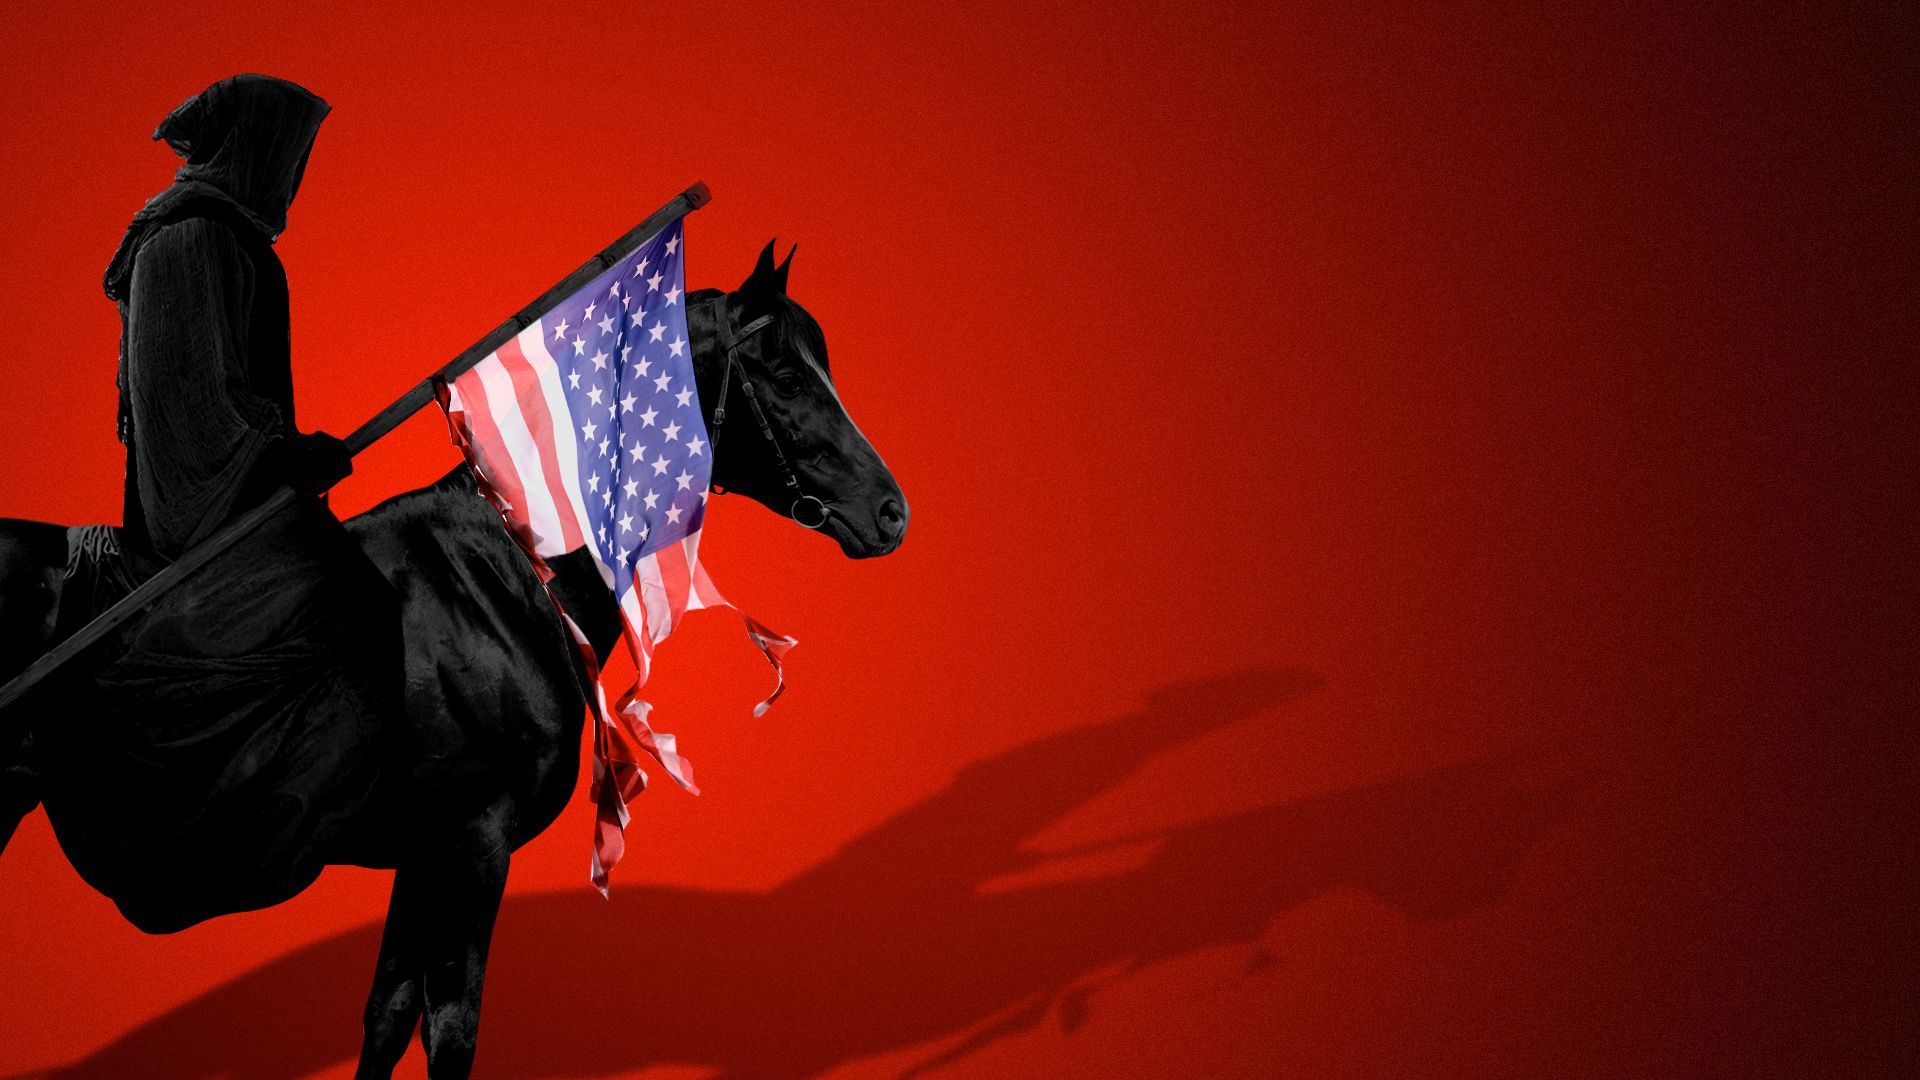 Illustration of the horseman of death carrying a tattered American flag